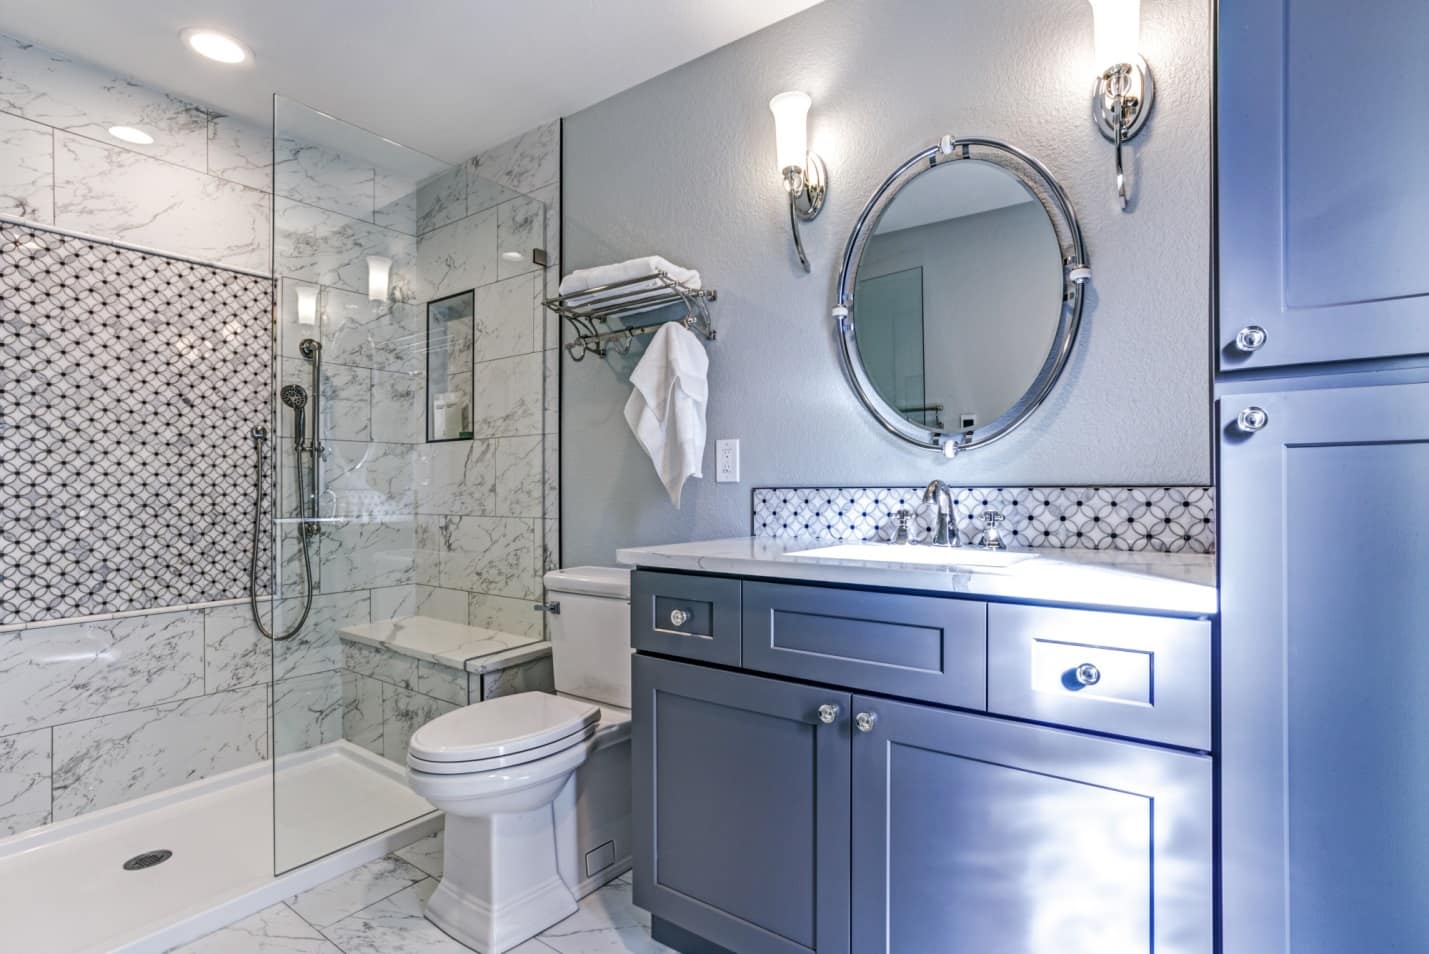 Spruce up Your Washroom: 8 DIY Shower Remodeling Ideas. Marble wall finishing in the shower zone and gray painted walls in the rest of the bathroom